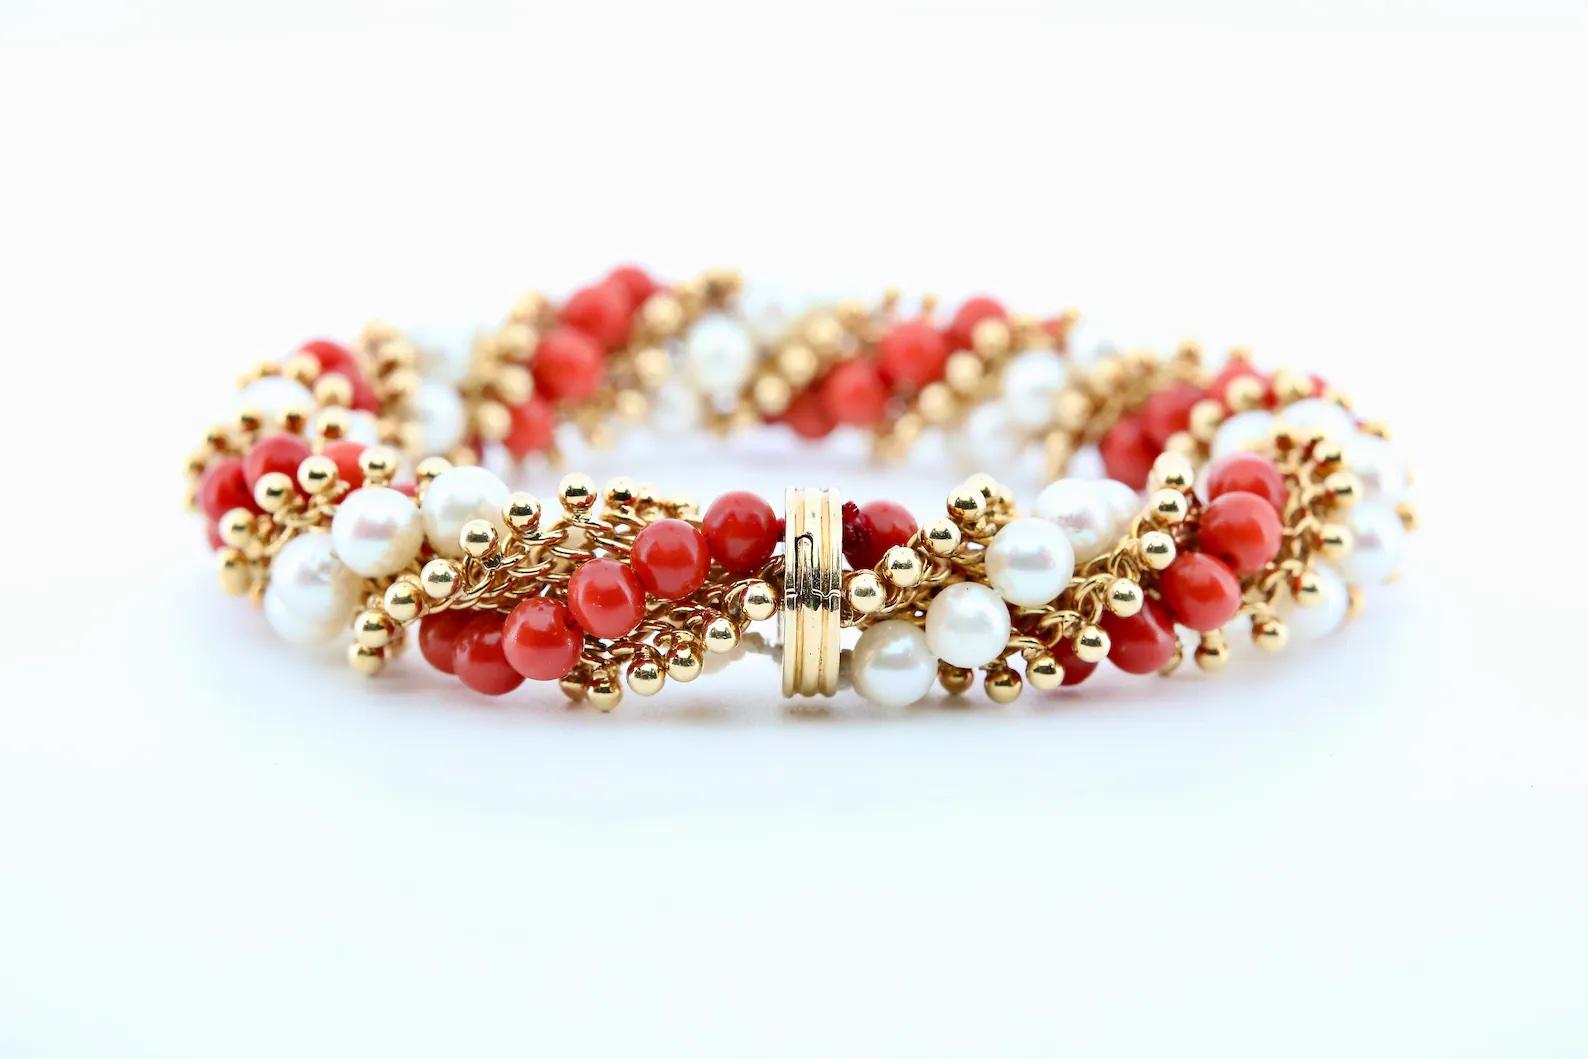 A mid century Van Cleef & Arpels Twist motif bracelet set with Coral and Pearls.

Crafted as a helix design, and adorned with intertwined strands of cultured pearls, and natural polished coral.

Hallmarked as 18 Karat Gold with French hallmarks.